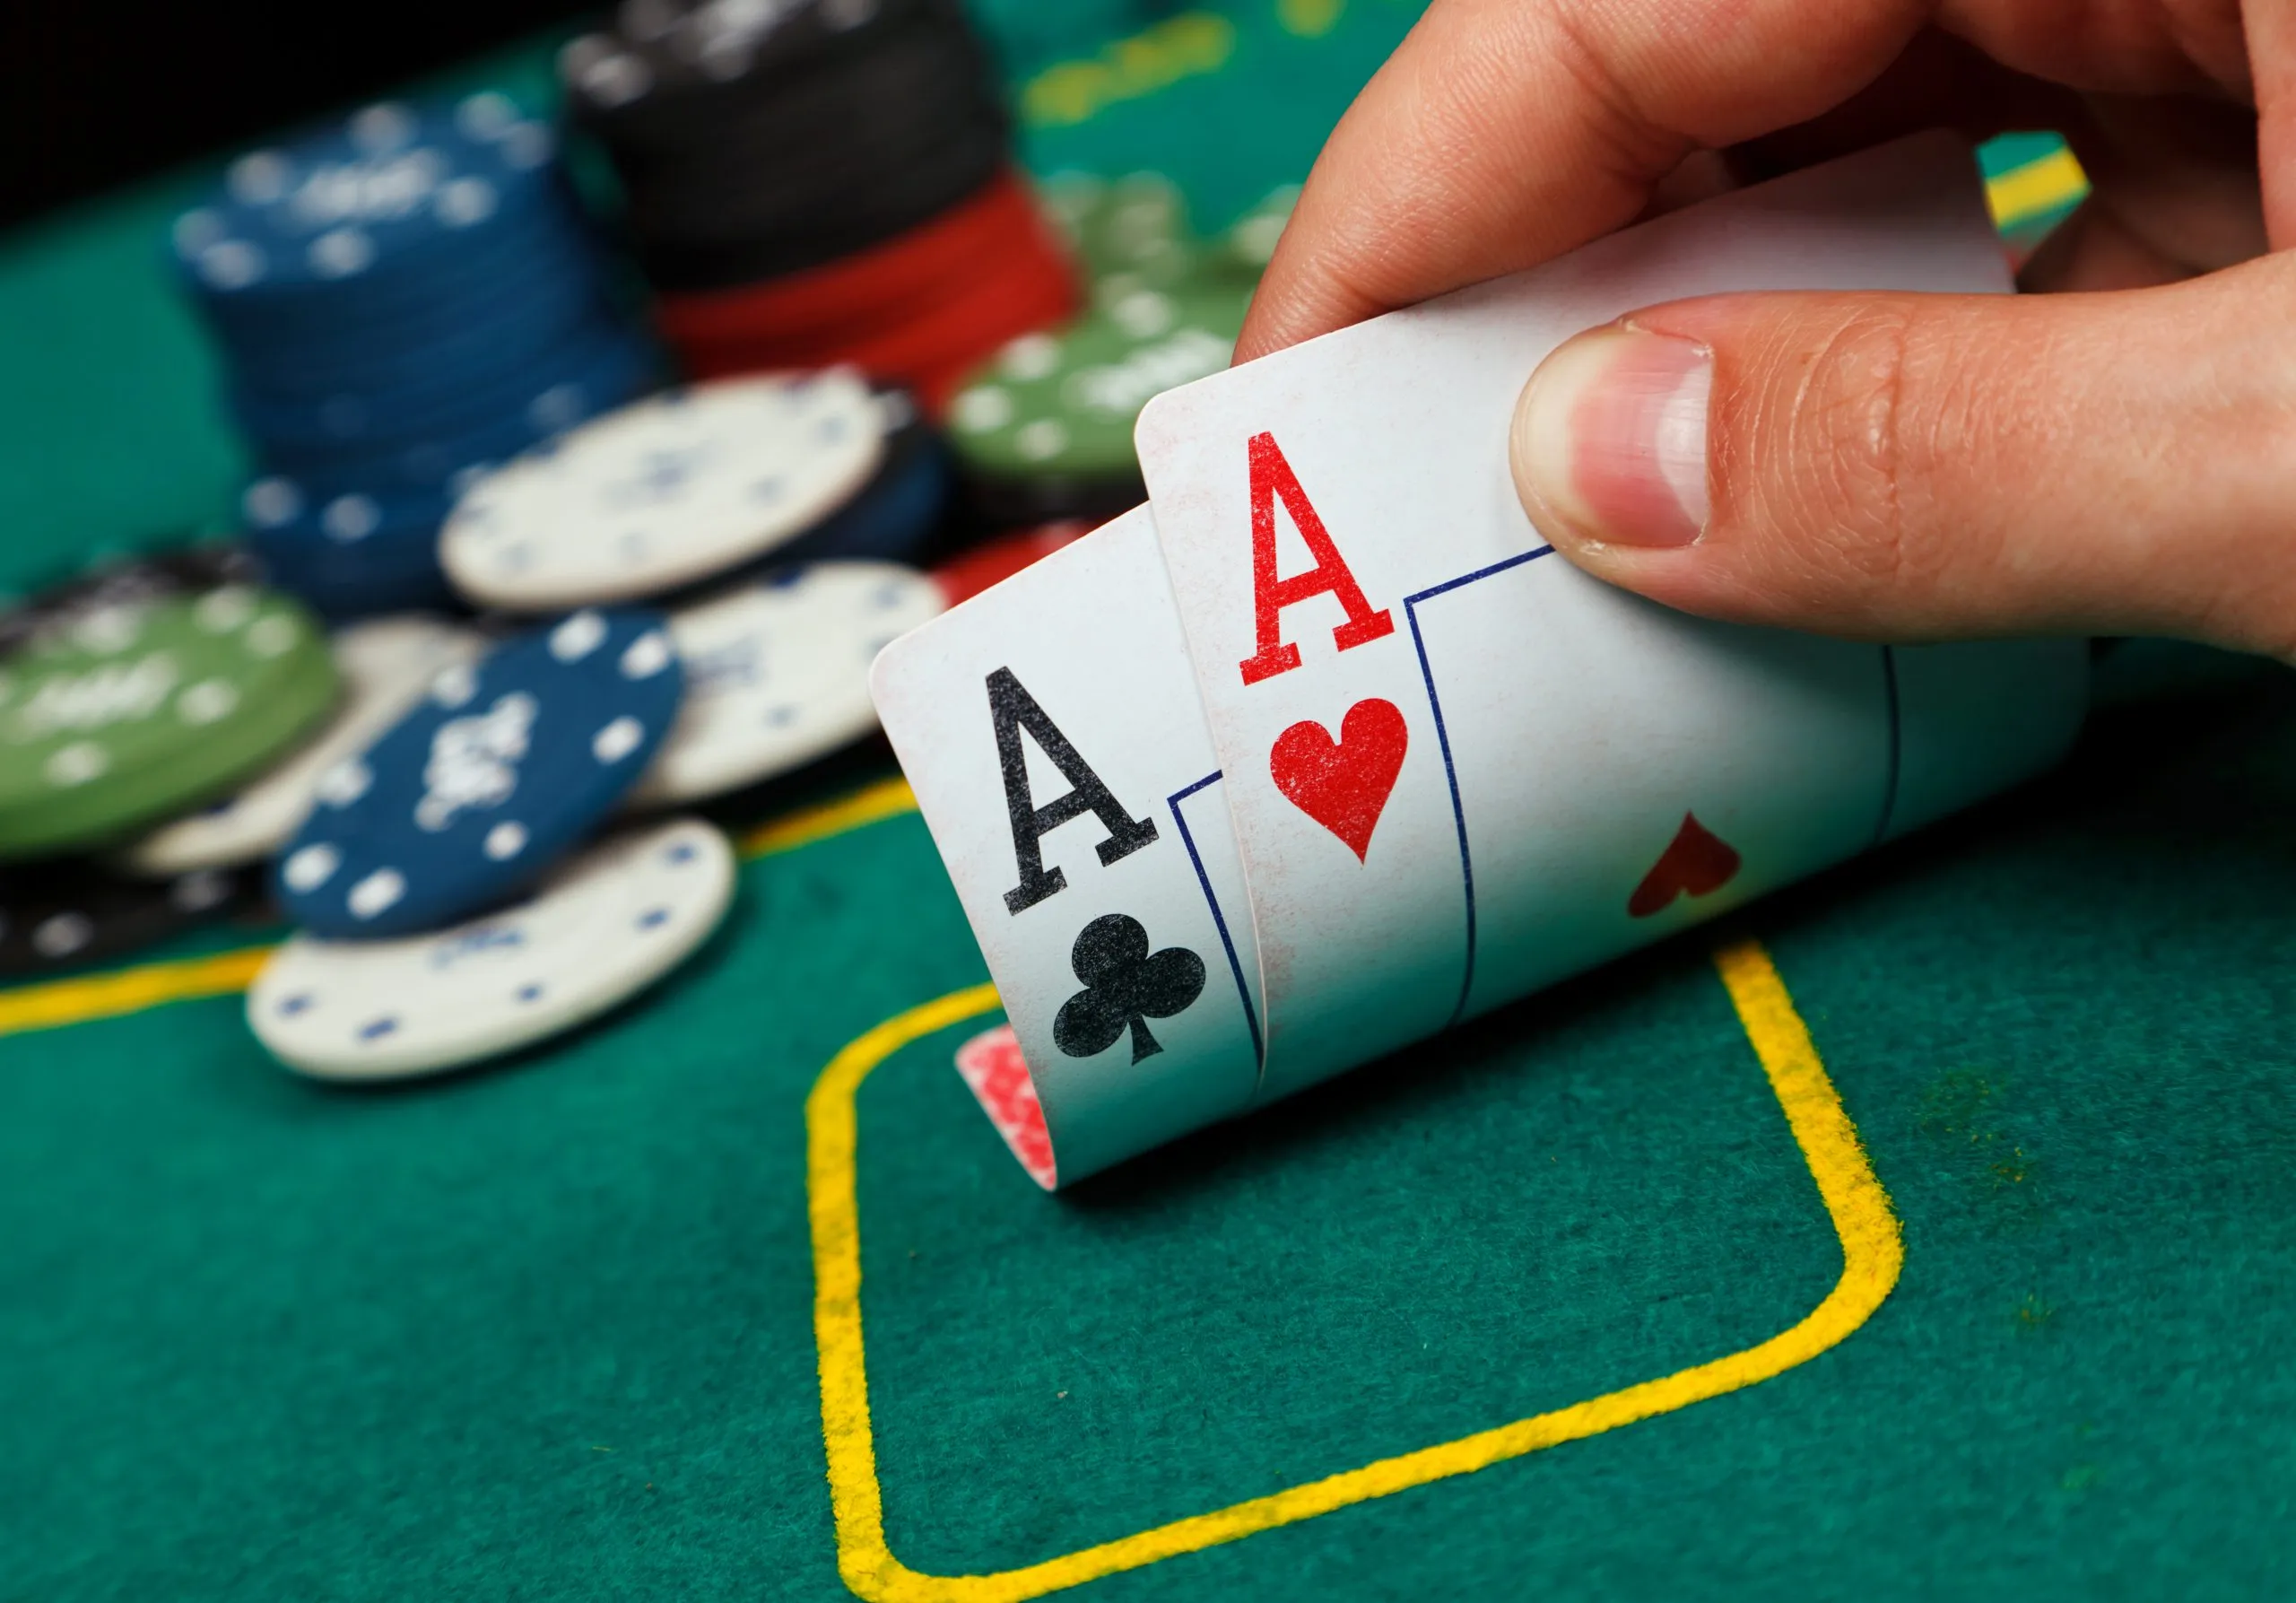 The Thrilling Pursuit: Why Play Poker with a Poker App